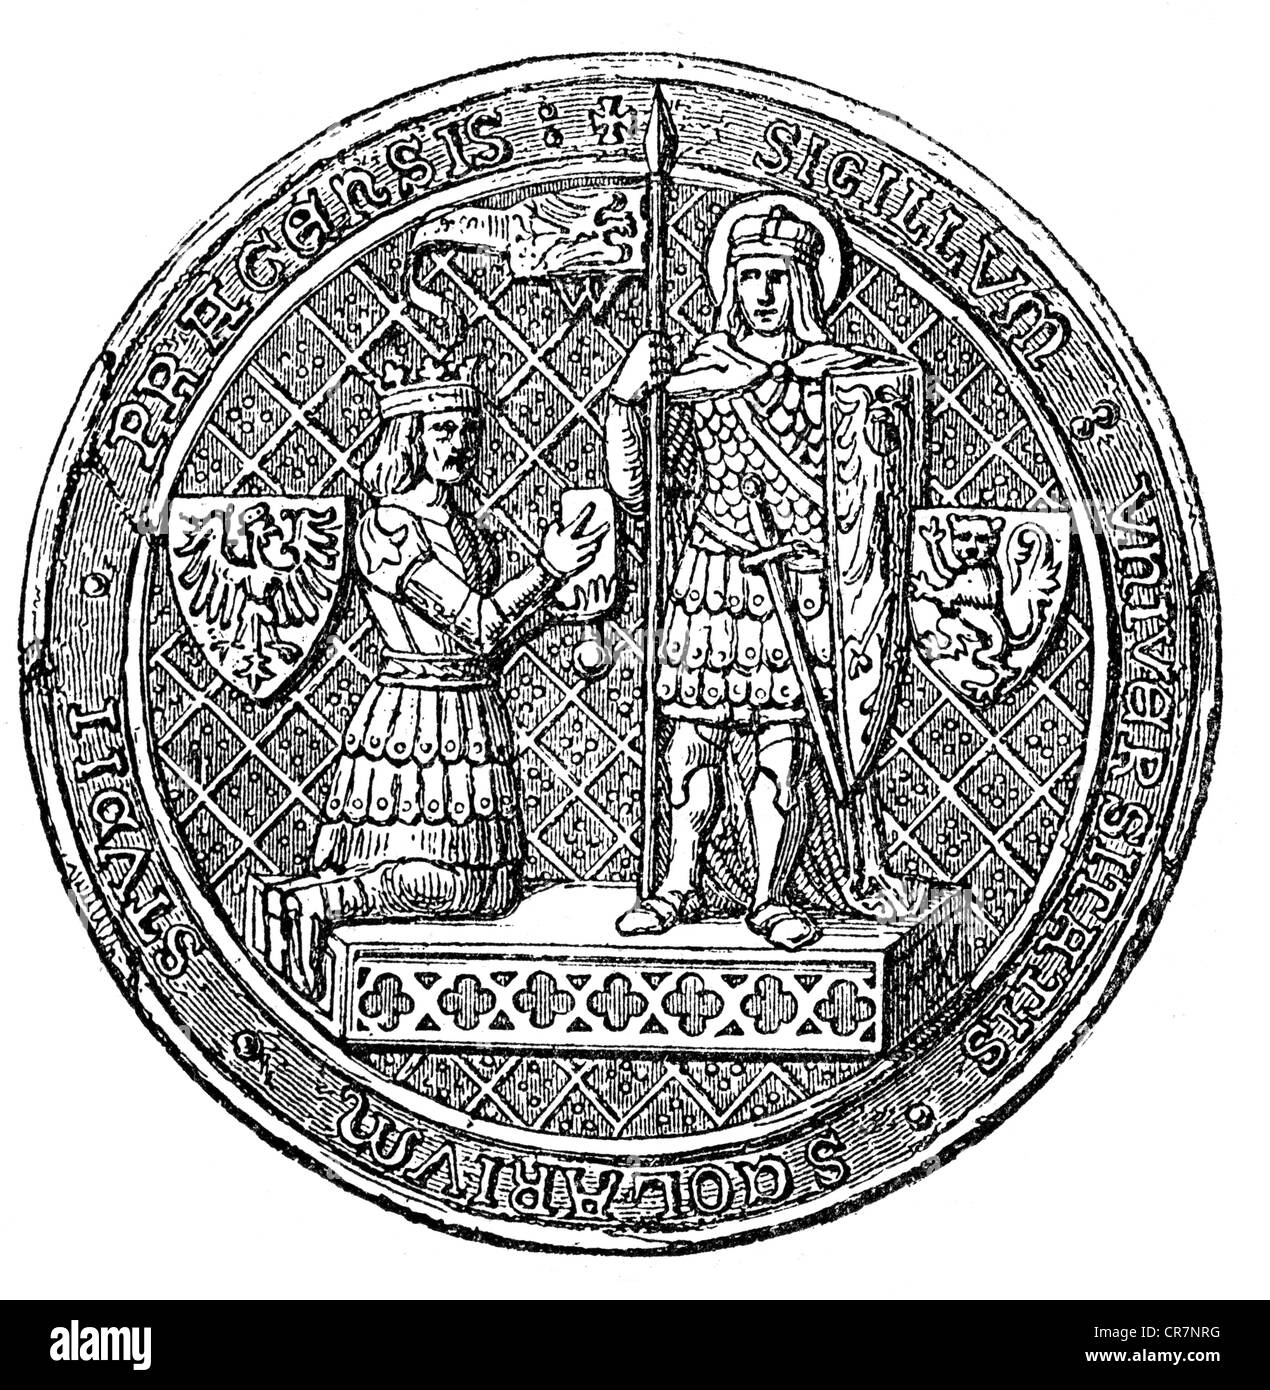 Charles IV, 14.5.1316 - 19.11.1378, Holy Roman Emperor 5.4.1355 - 19.11.1378, genuflect in front of Saint Wenceslaus, seal of the University of Prague, 14th century, wood engraving, 19th century, Stock Photo